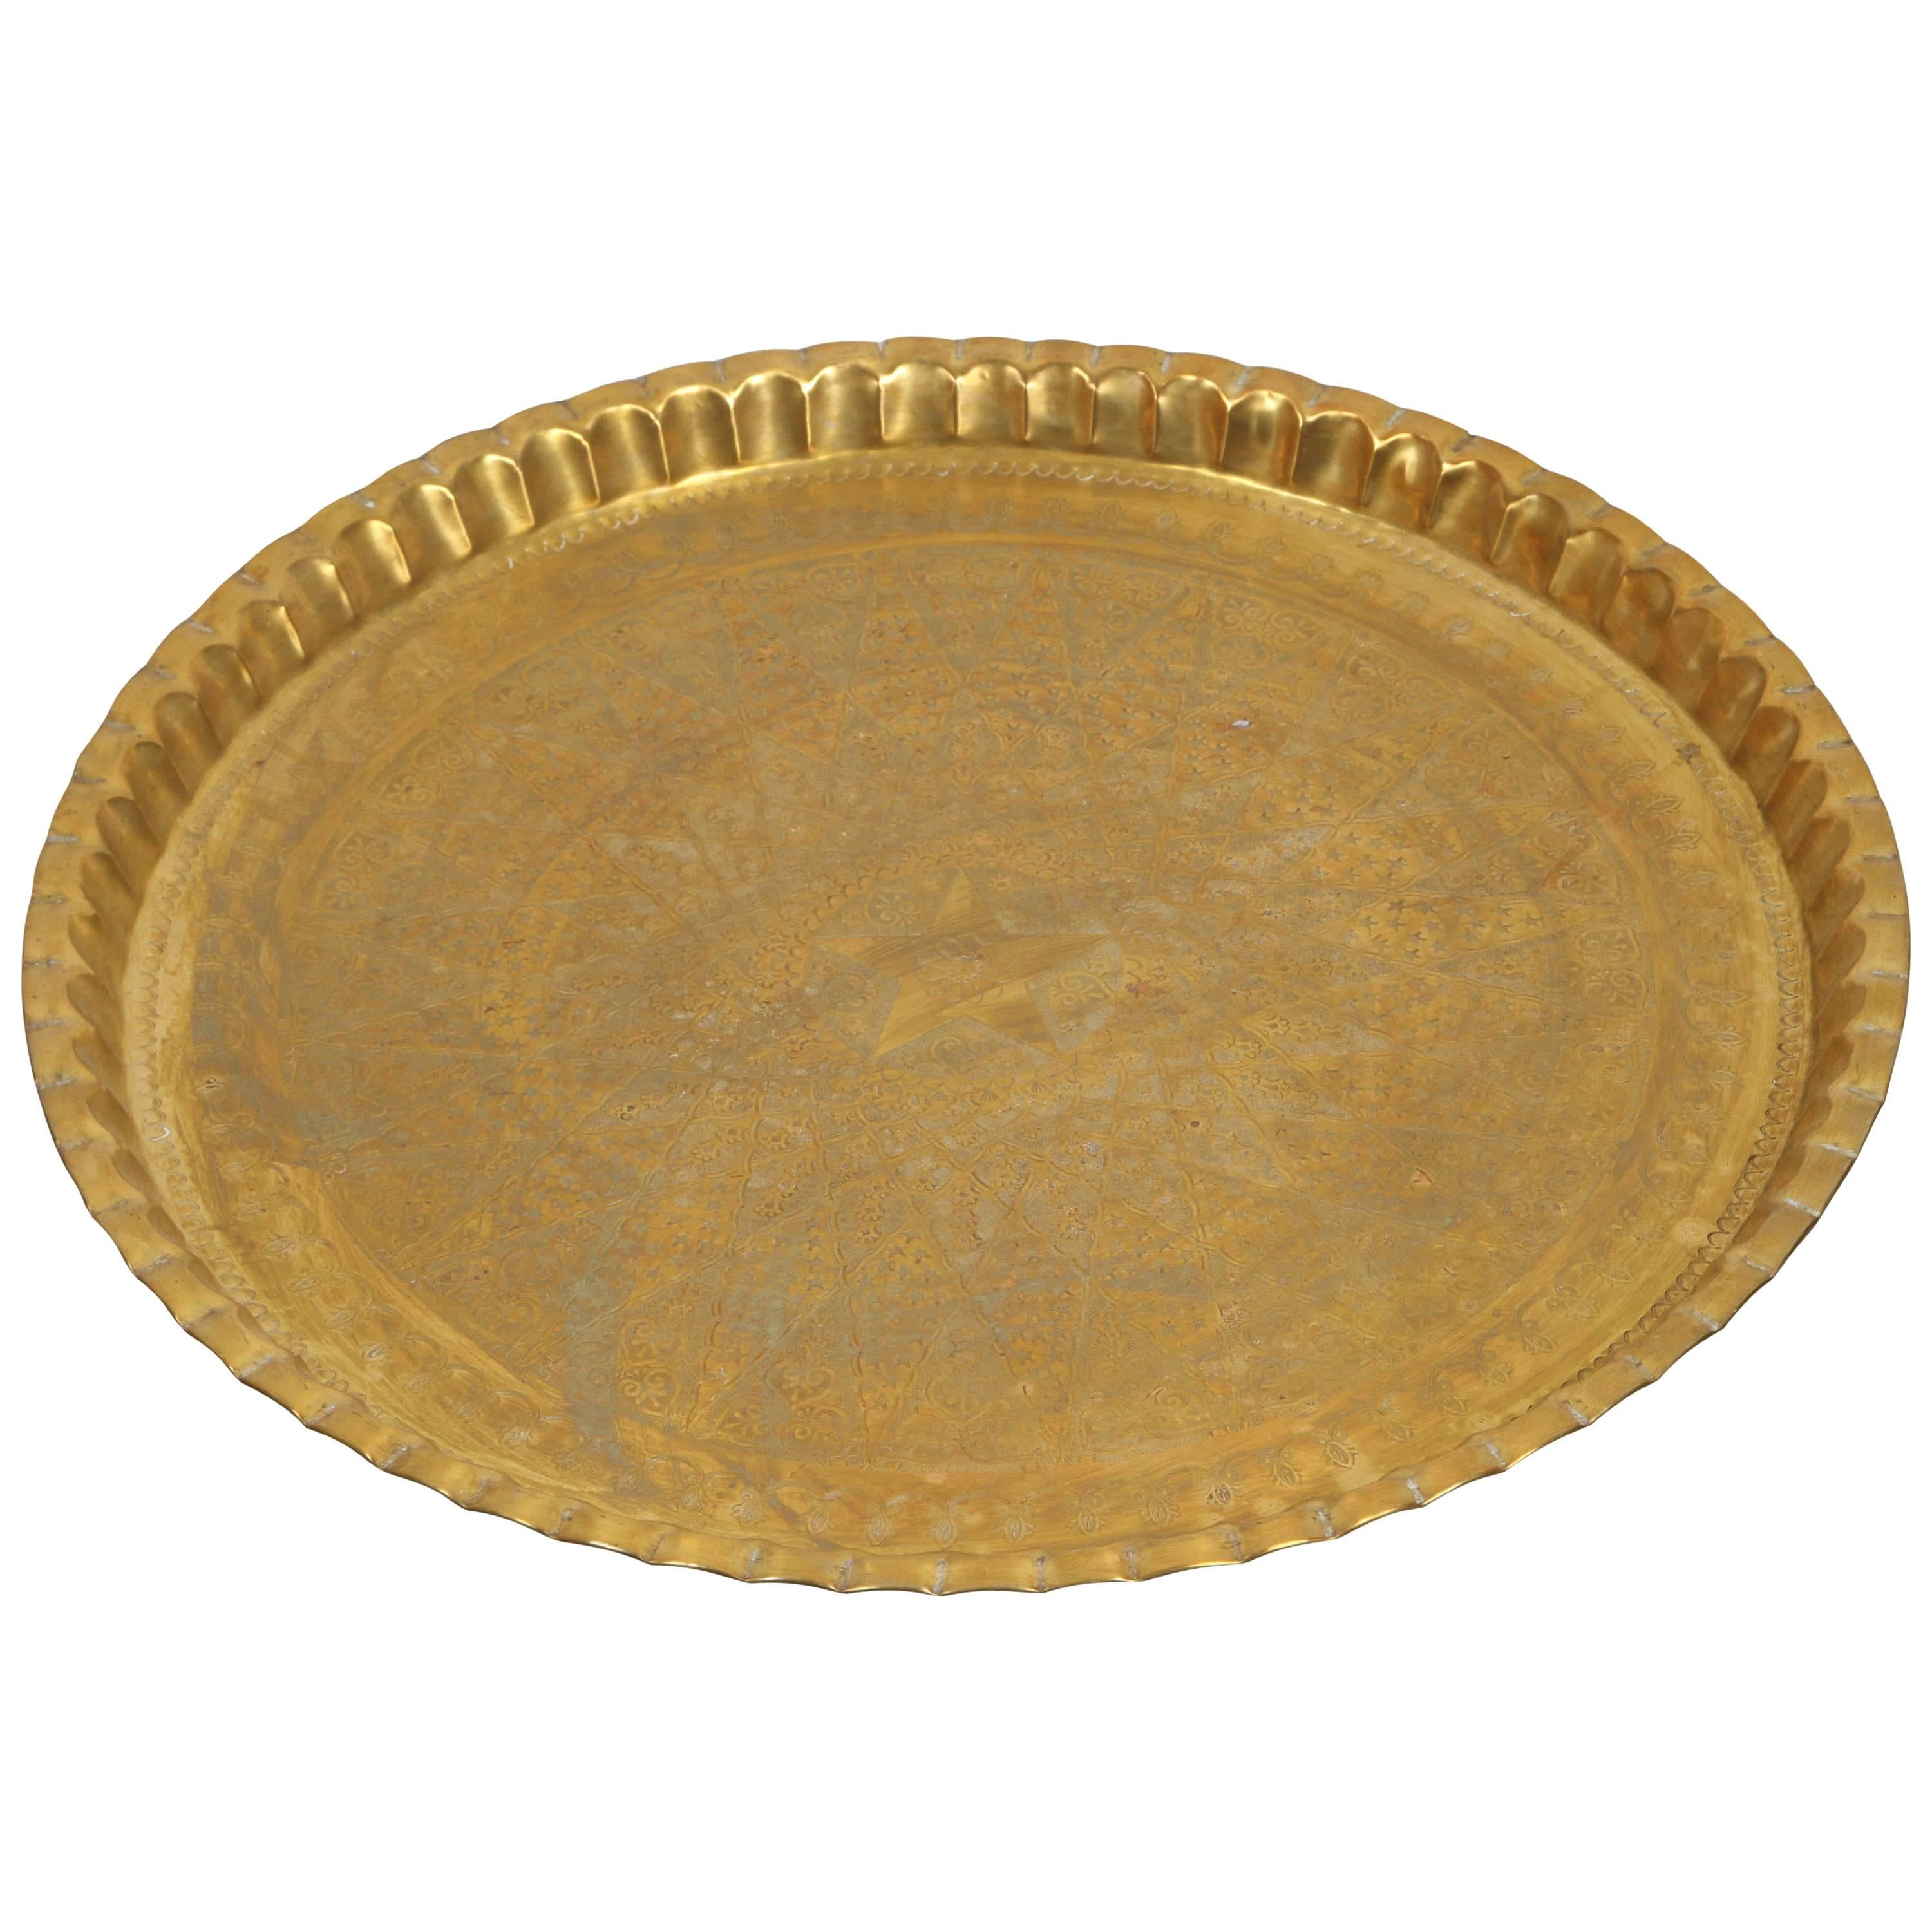 Large decorative Moorish brass tray, serving platter.
Middle Eastern hand-made and hand hammered in Syria by skilled artisans.
This nice brass tray is hand hammered with elaborate and fine Islamic geometric designs, with a star in the middle and pie